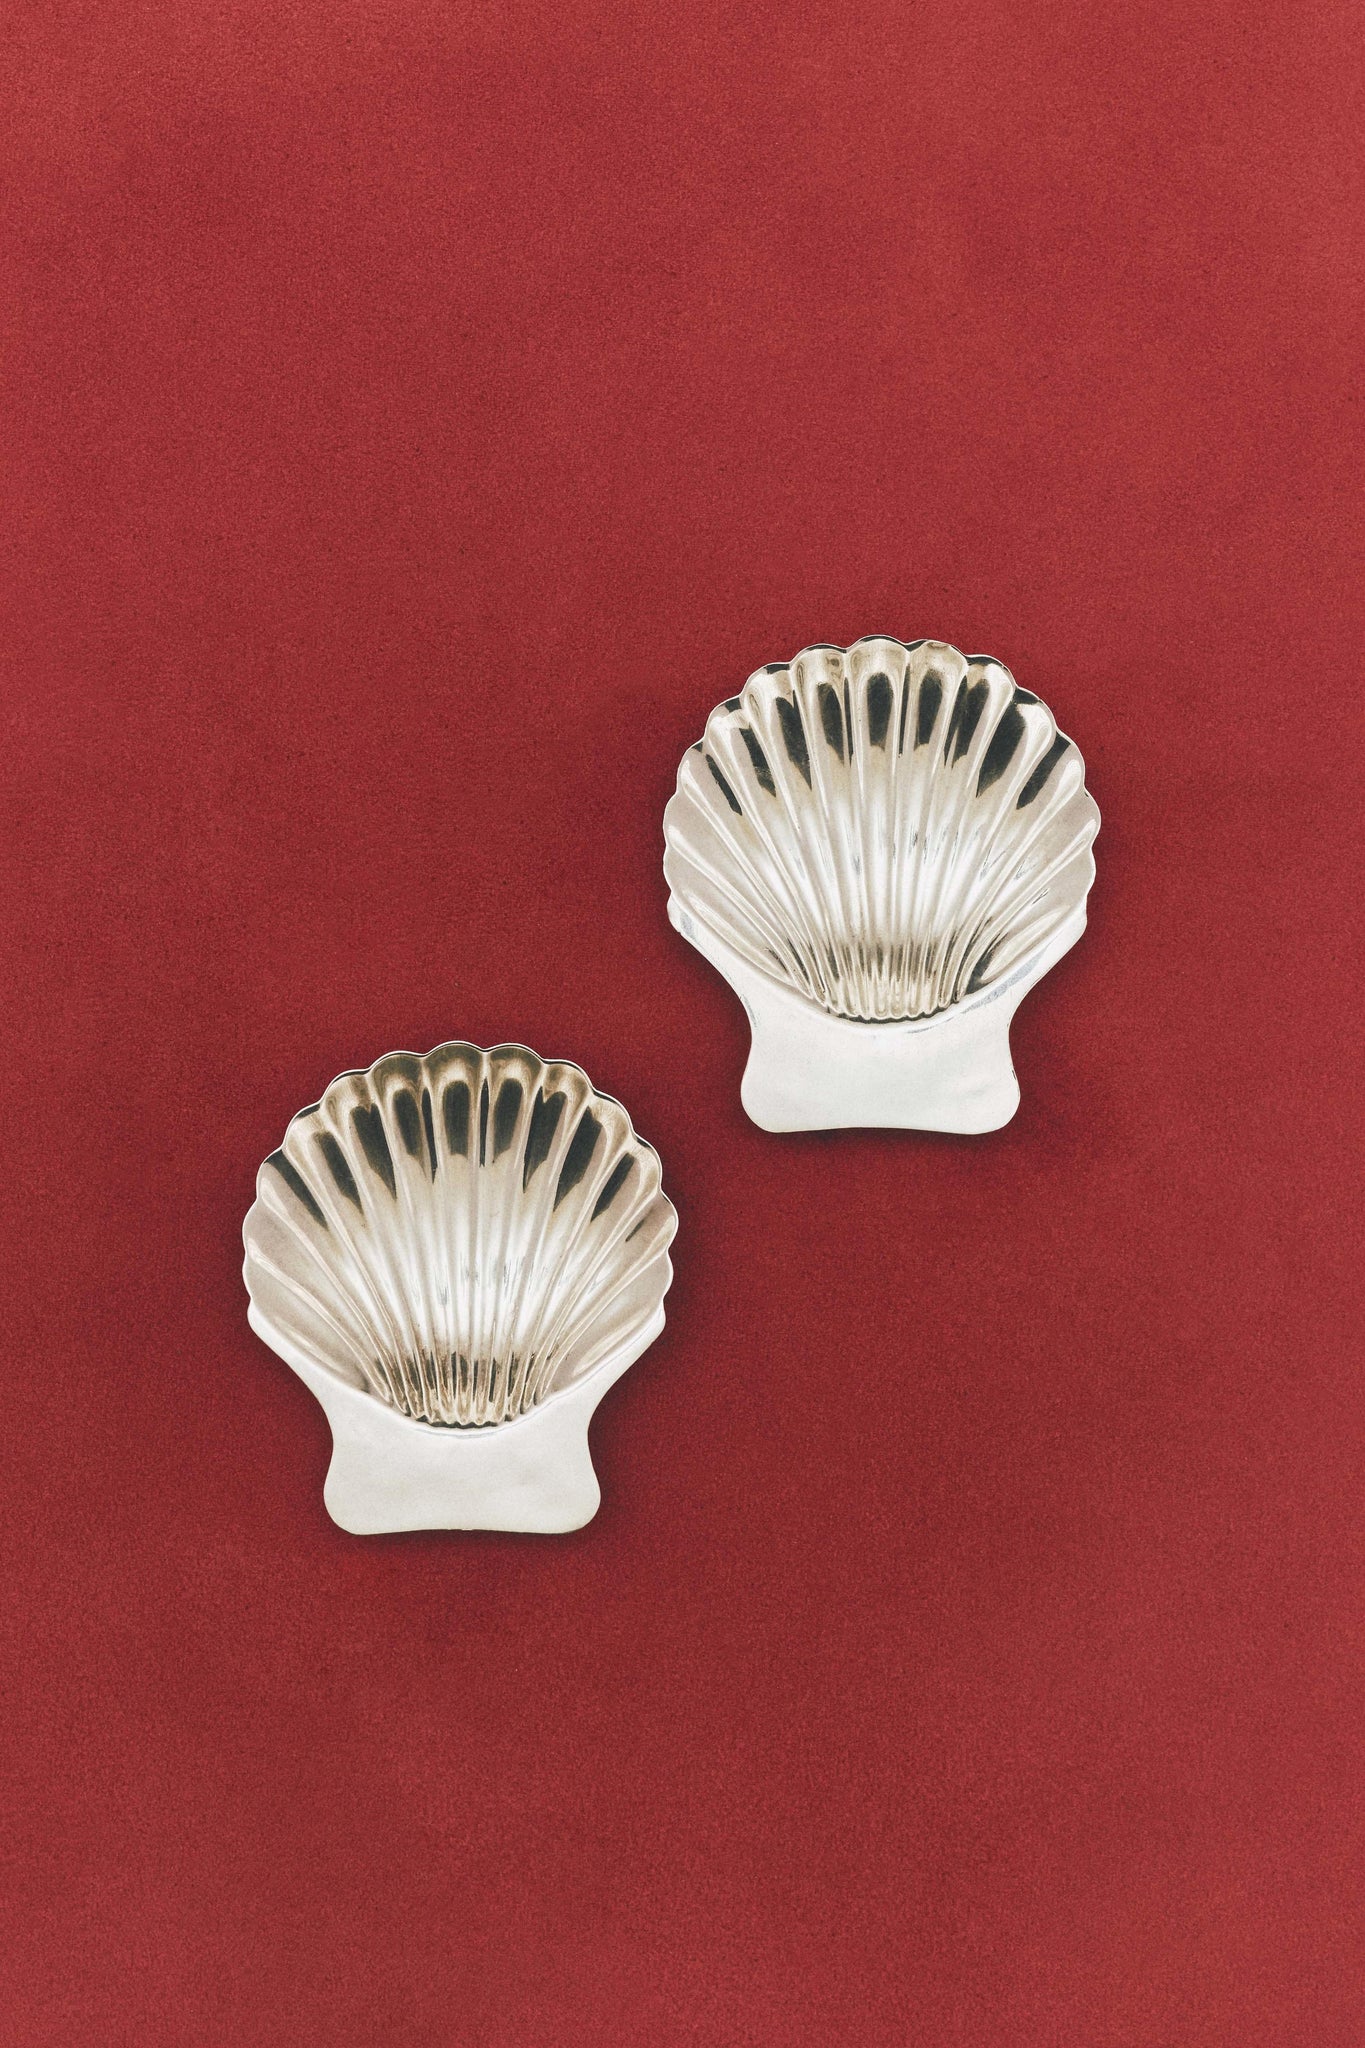 Vintage Shell Dishes